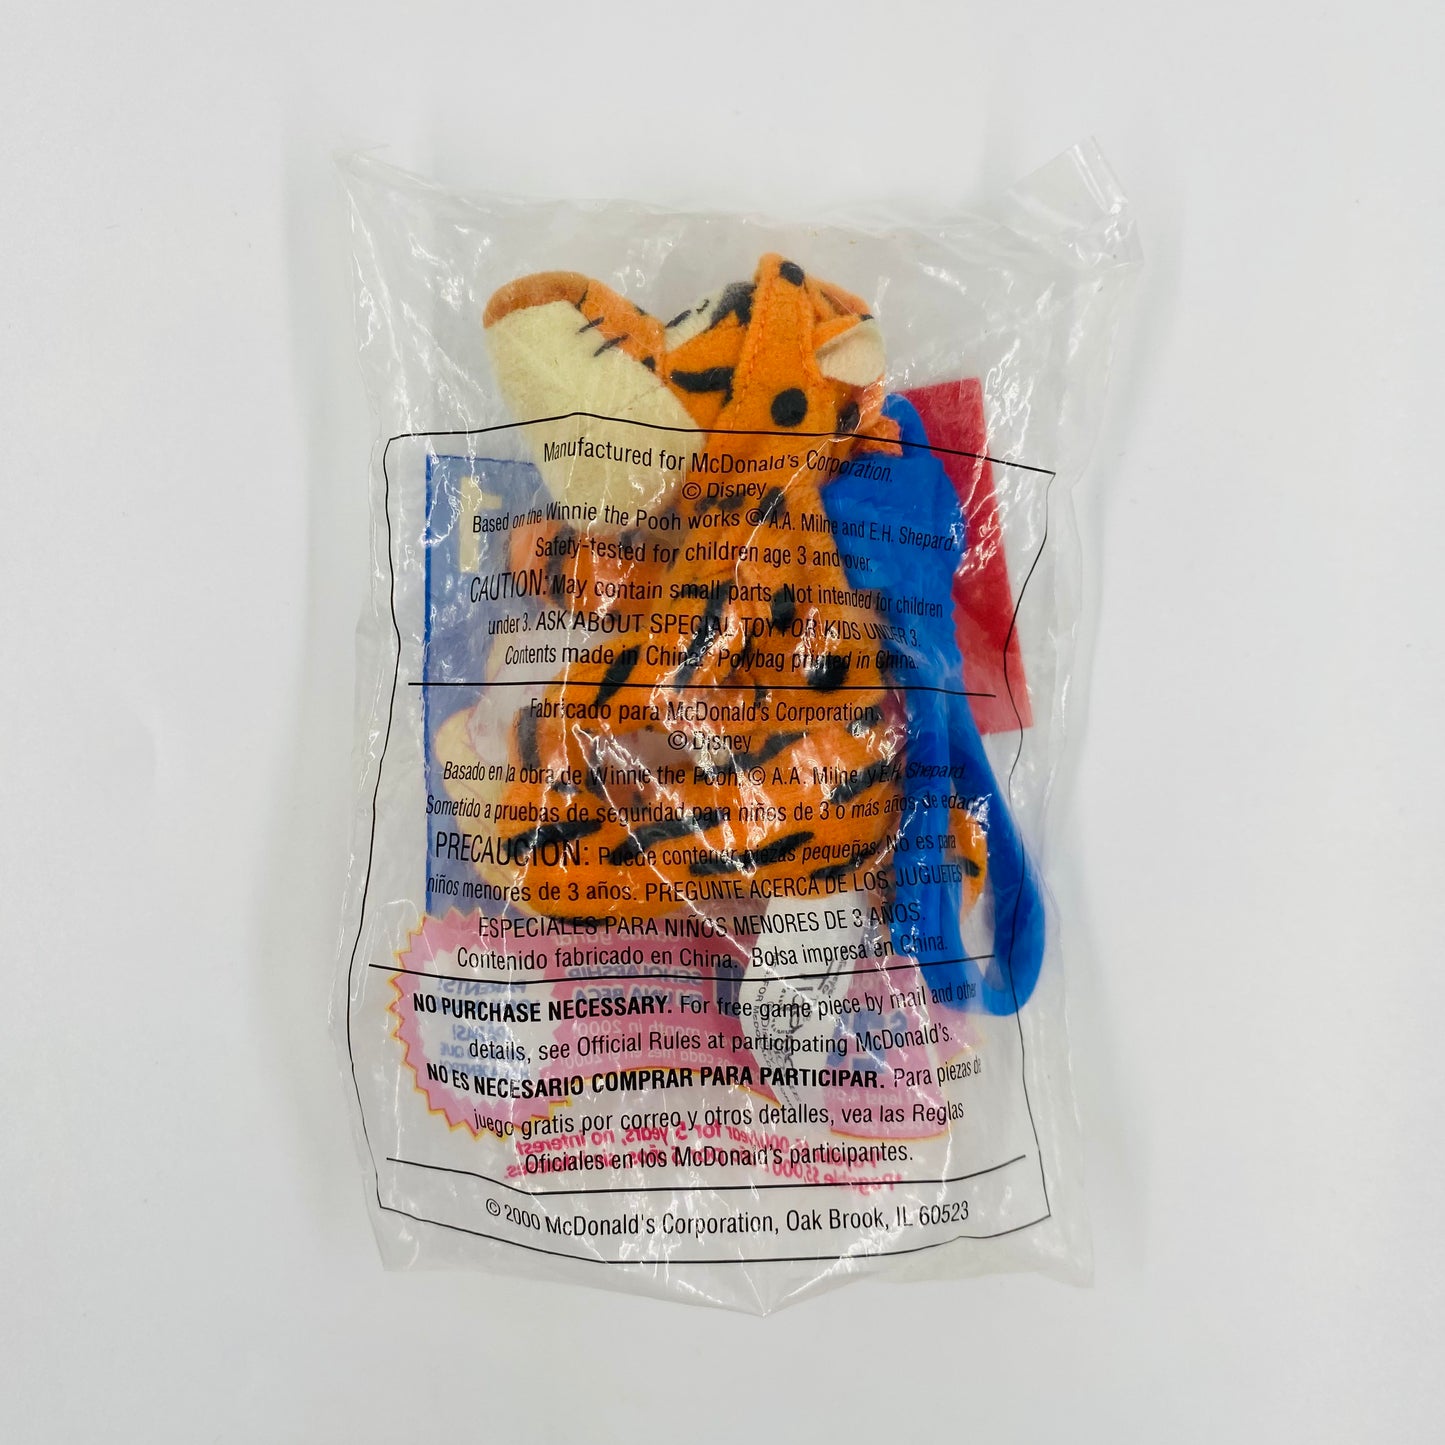 The Tigger Movie Tigger McDonald's Happy Meal soft toy (2000) bagged